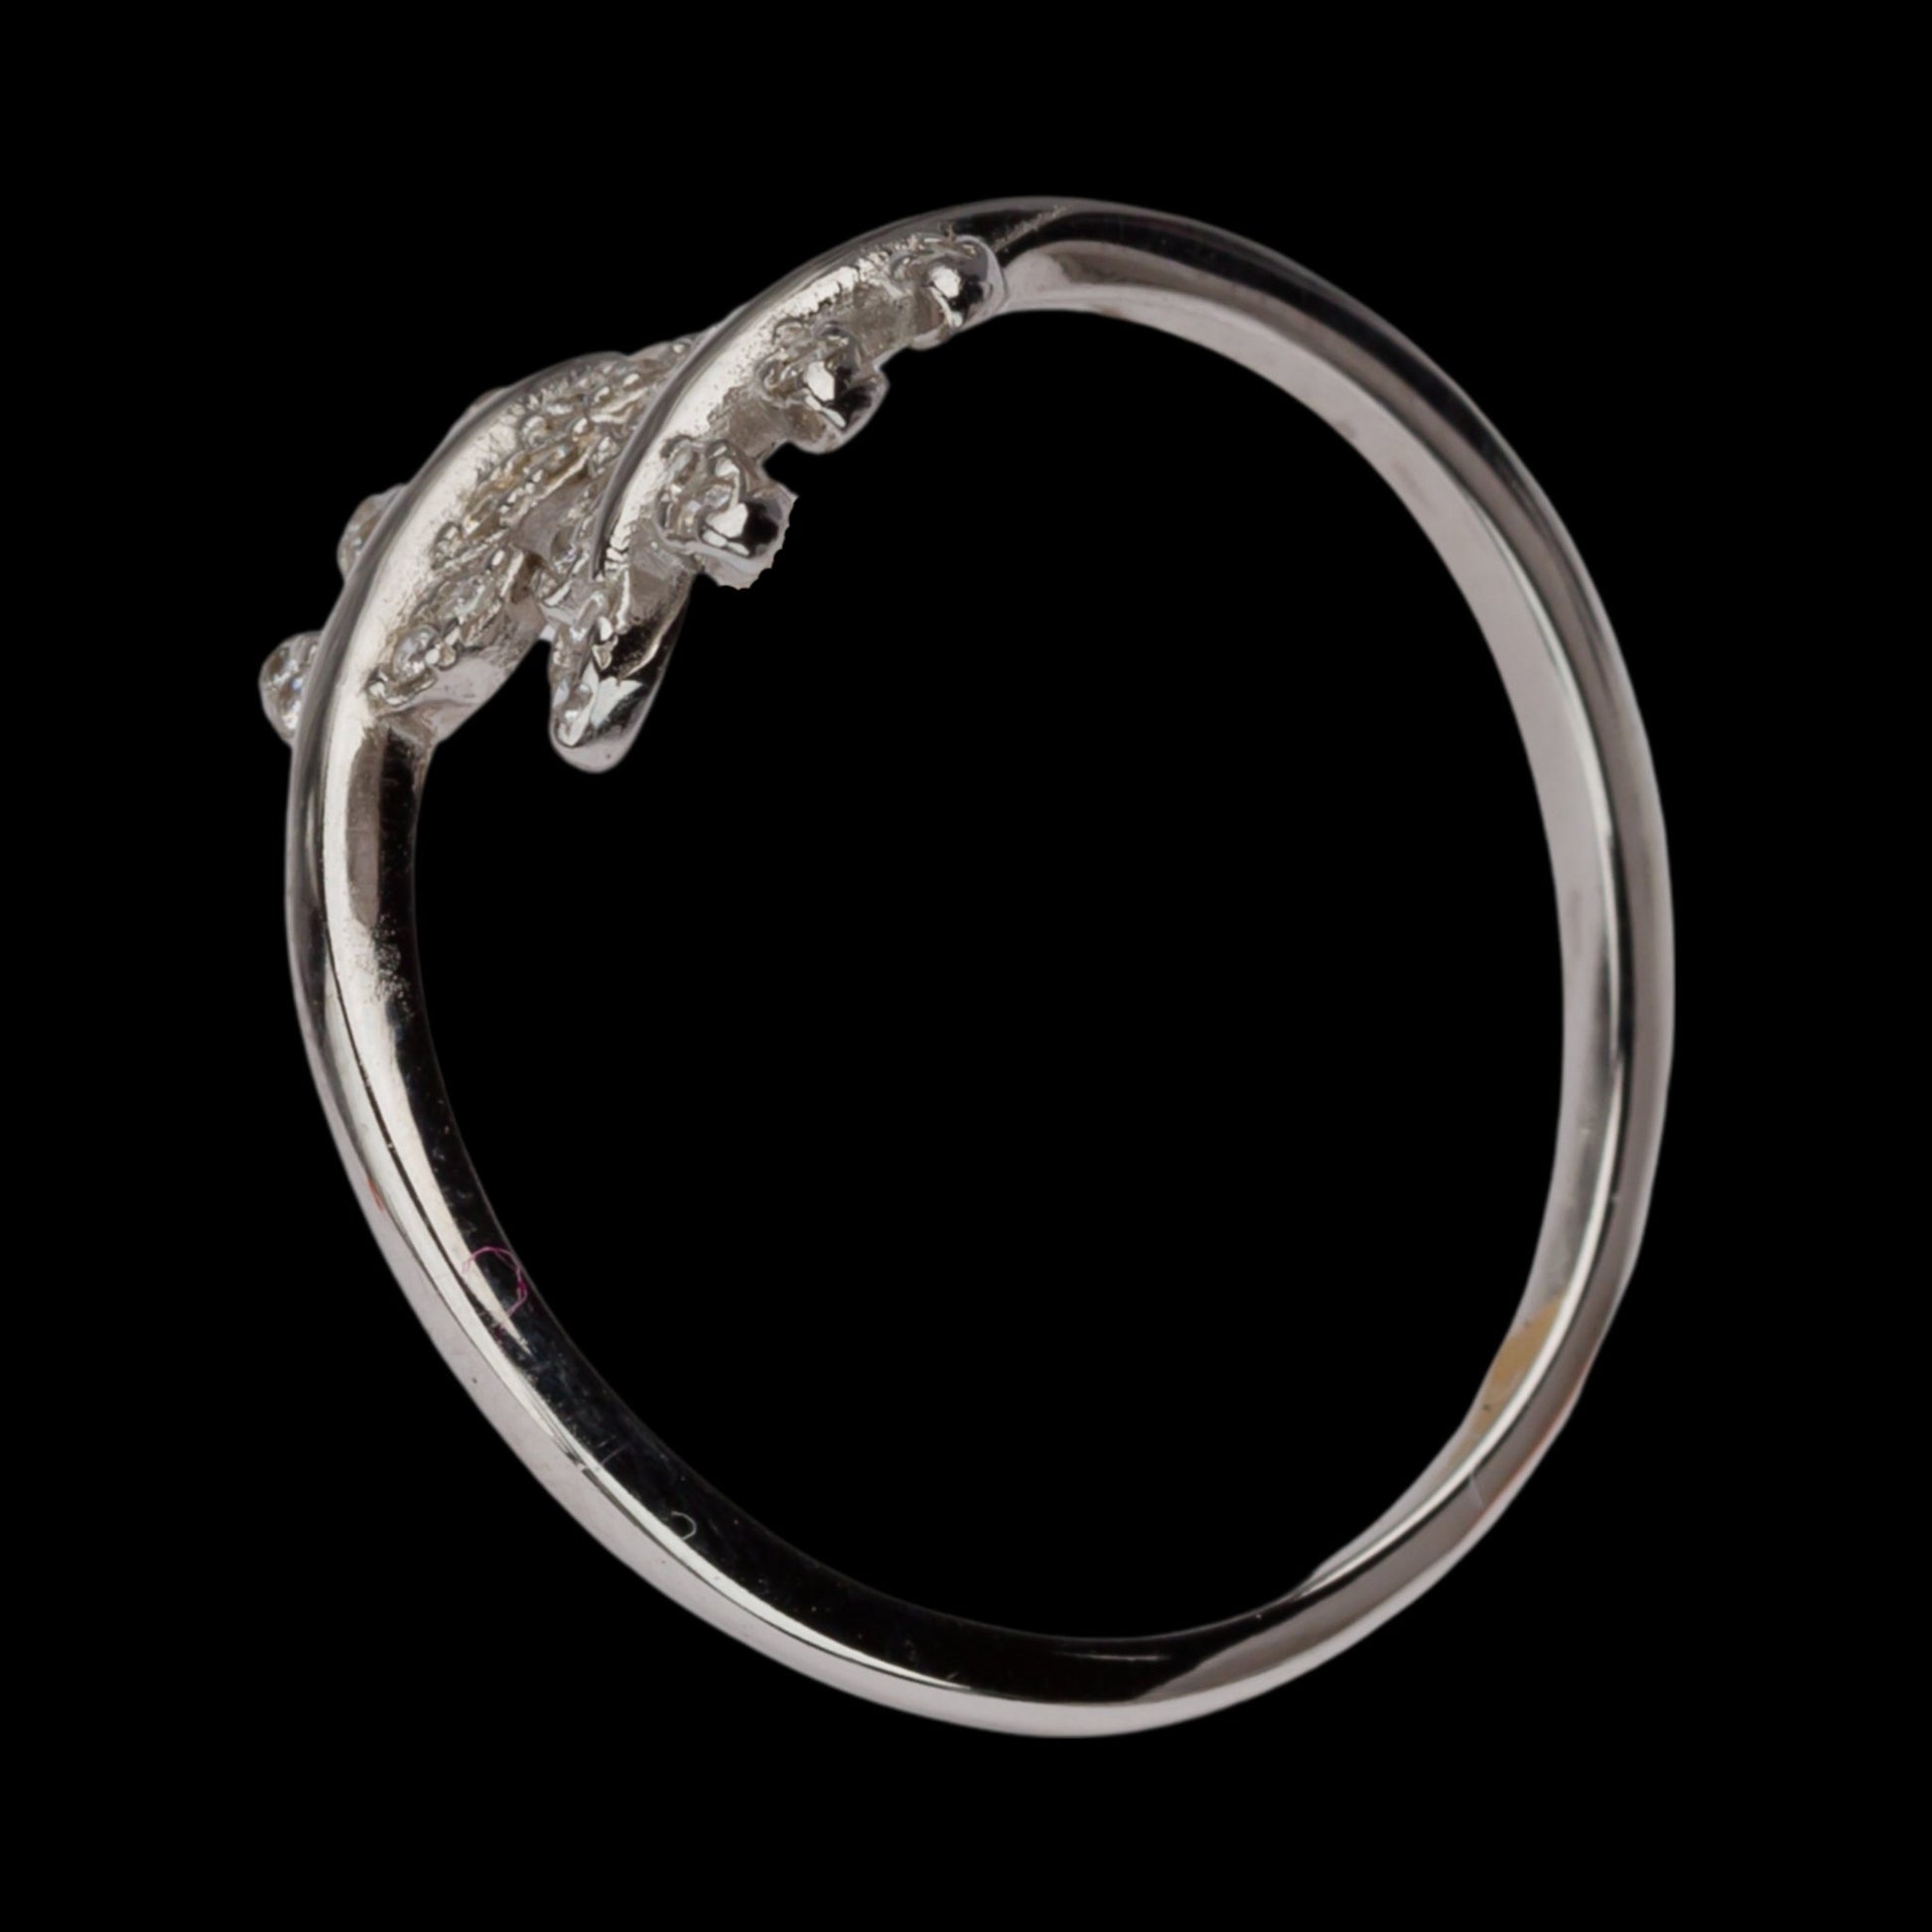 Silver Adjustable Double Leaf Ring with Zircon Accents - SBJ